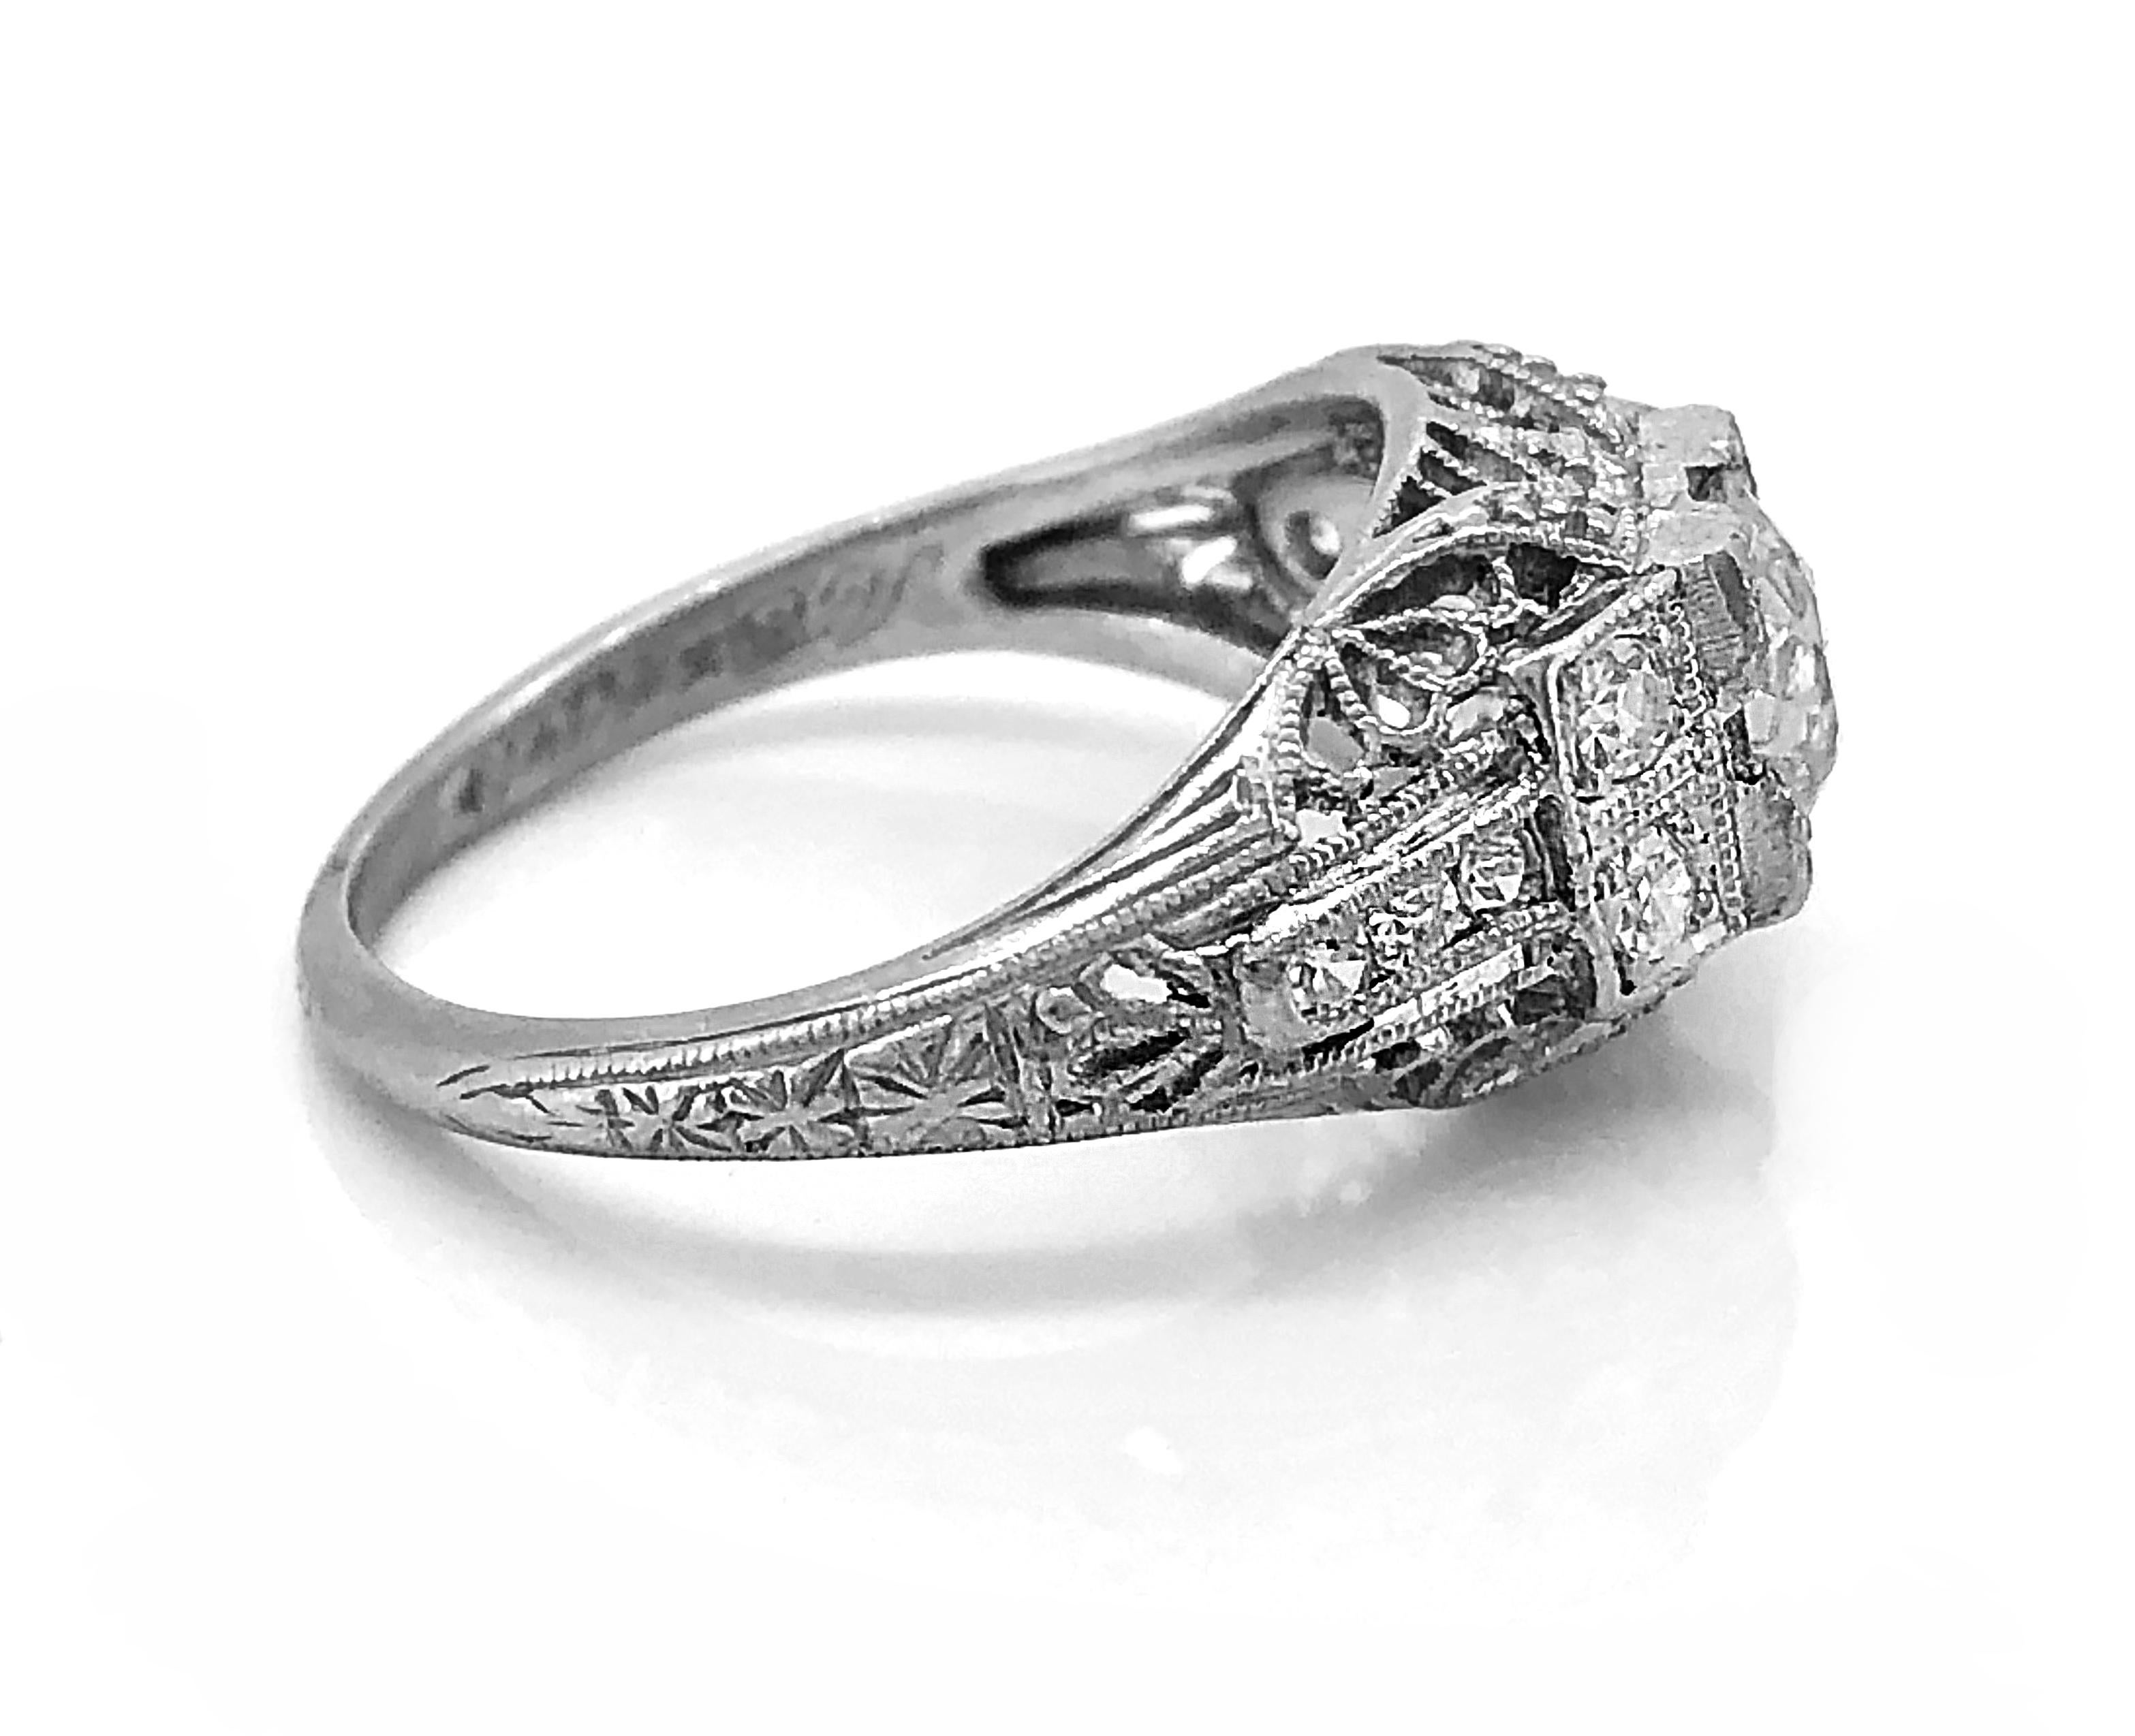 An exceptional Platinum & Diamond Art Deco Antique Engagement Ring by S. Kind & Son. This beautiful ring is highlighted by gorgeous filigree & pierced decoration, supporting a .53ct. apx. European cut diamond that is VS2 in clarity and H in color.